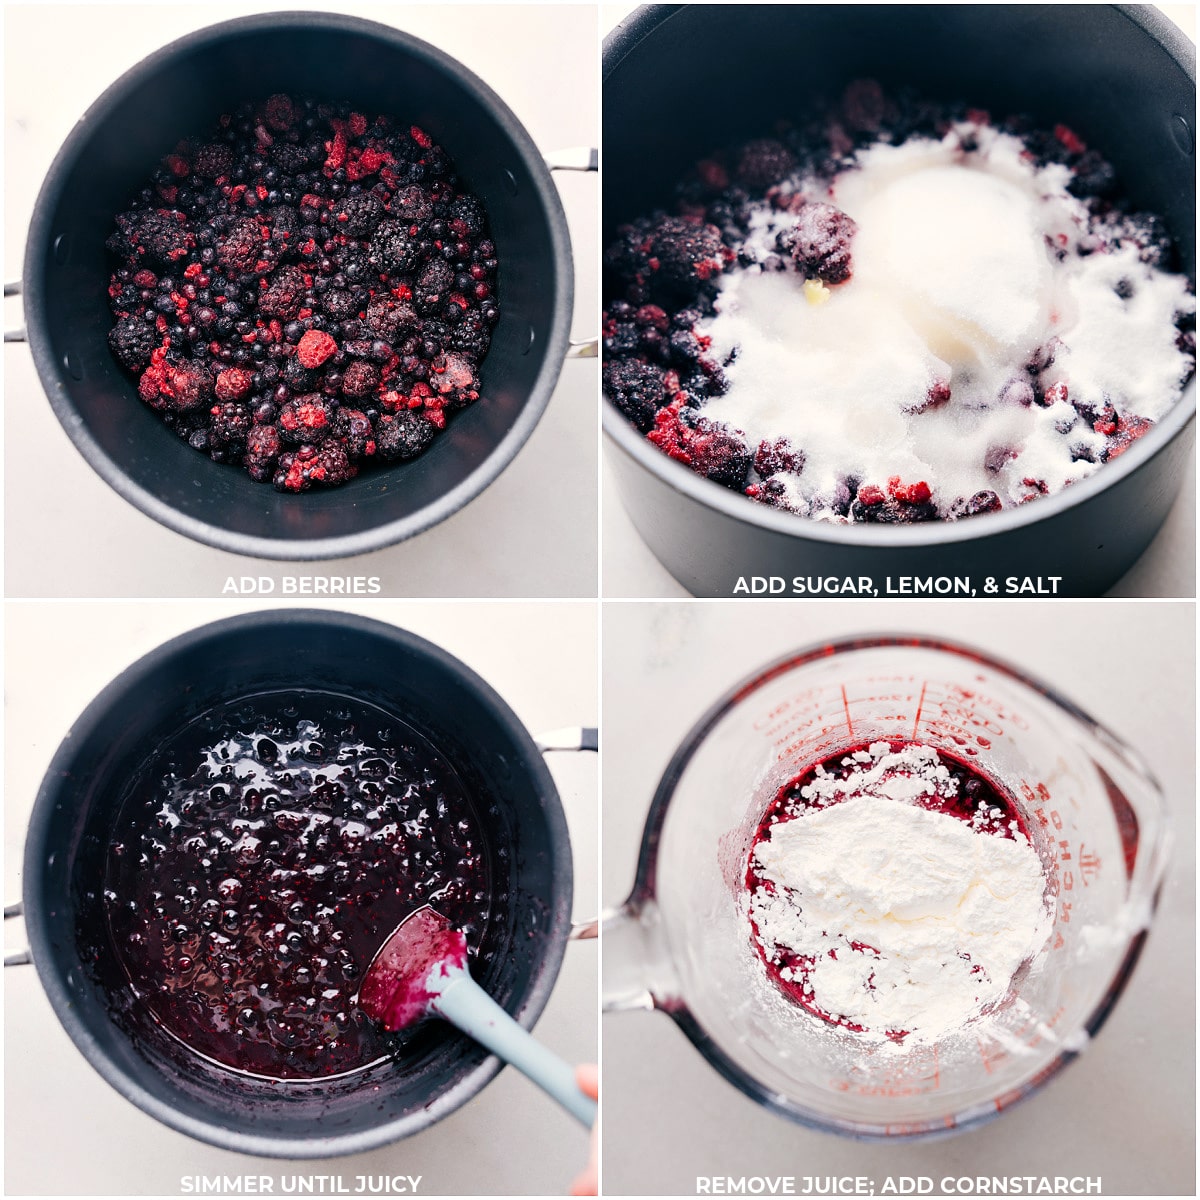 All the berries, sugar, lemon, salt, and cornstarch being added to a pot to simmer until juicy for this berry pie.